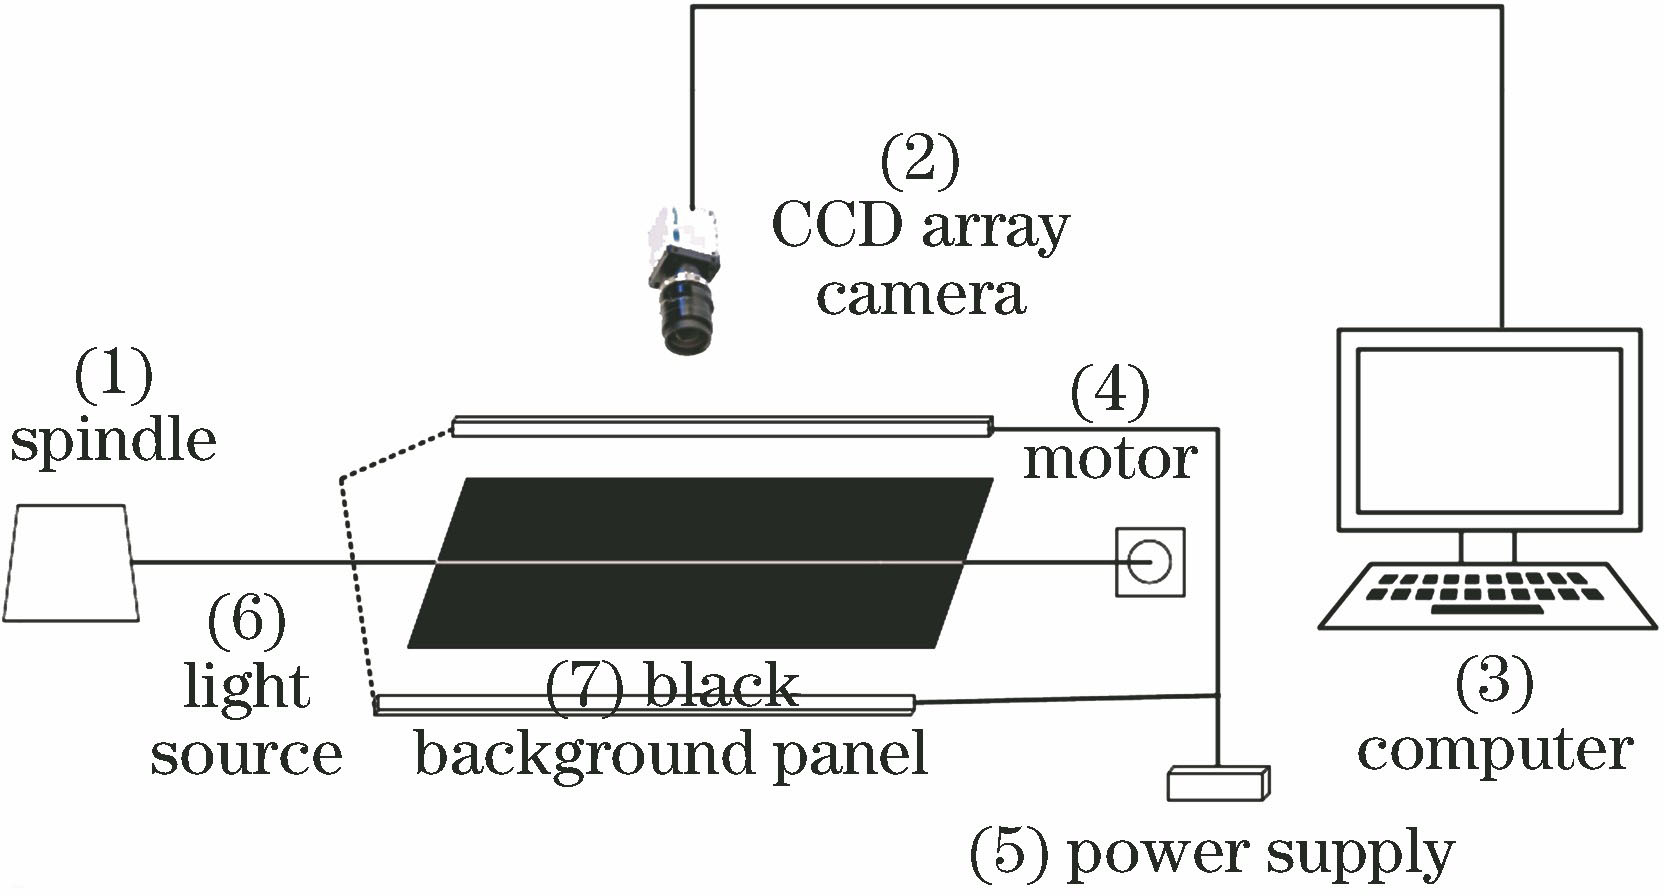 Diagram of image acquisition system